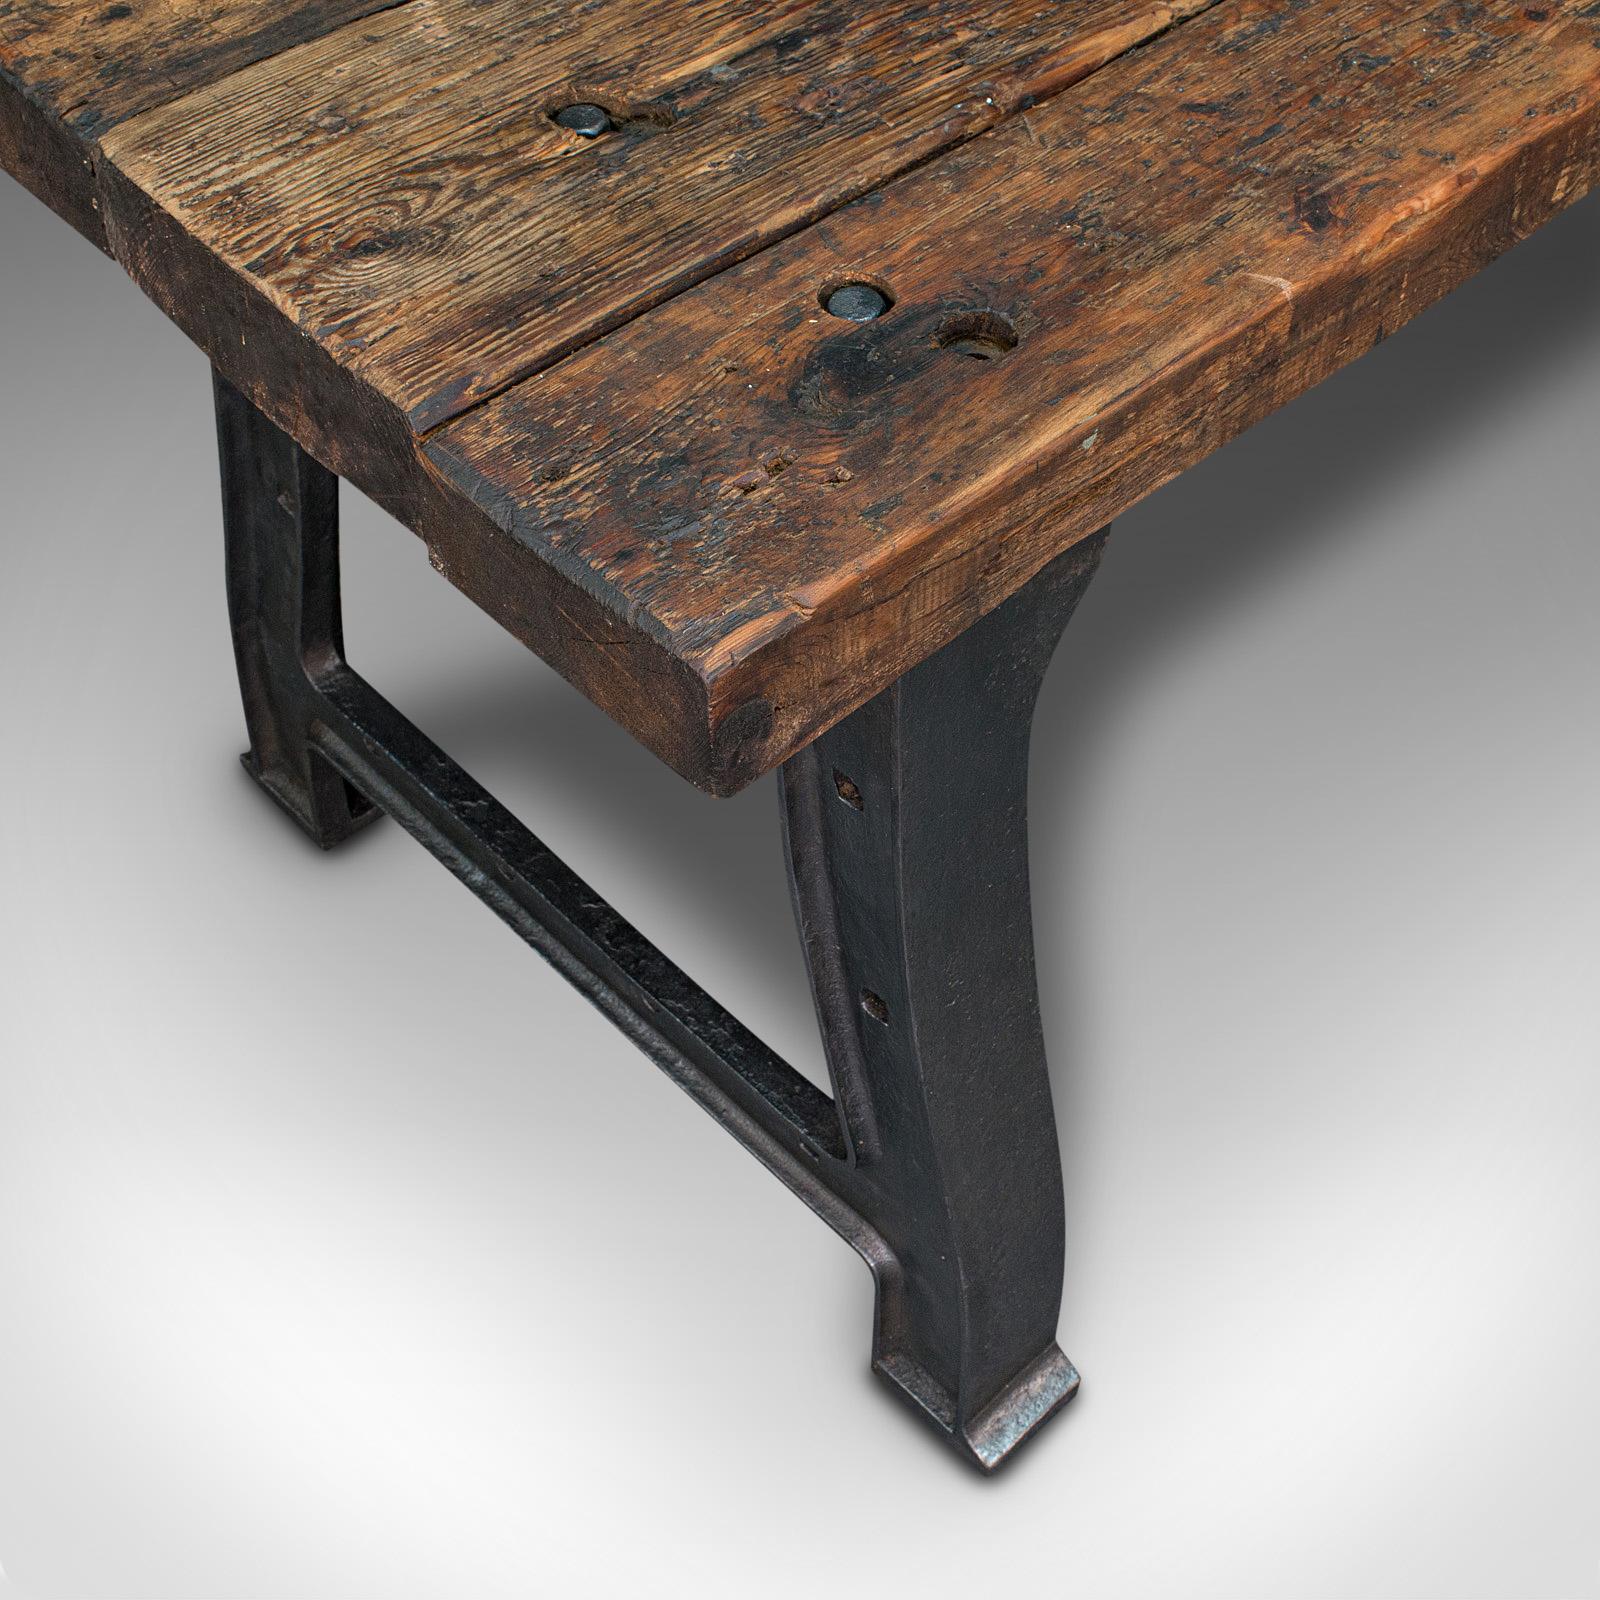 Antique Foundry Table, English, Pine, Iron, Heavy, Industrial Taste, Victorian For Sale 3